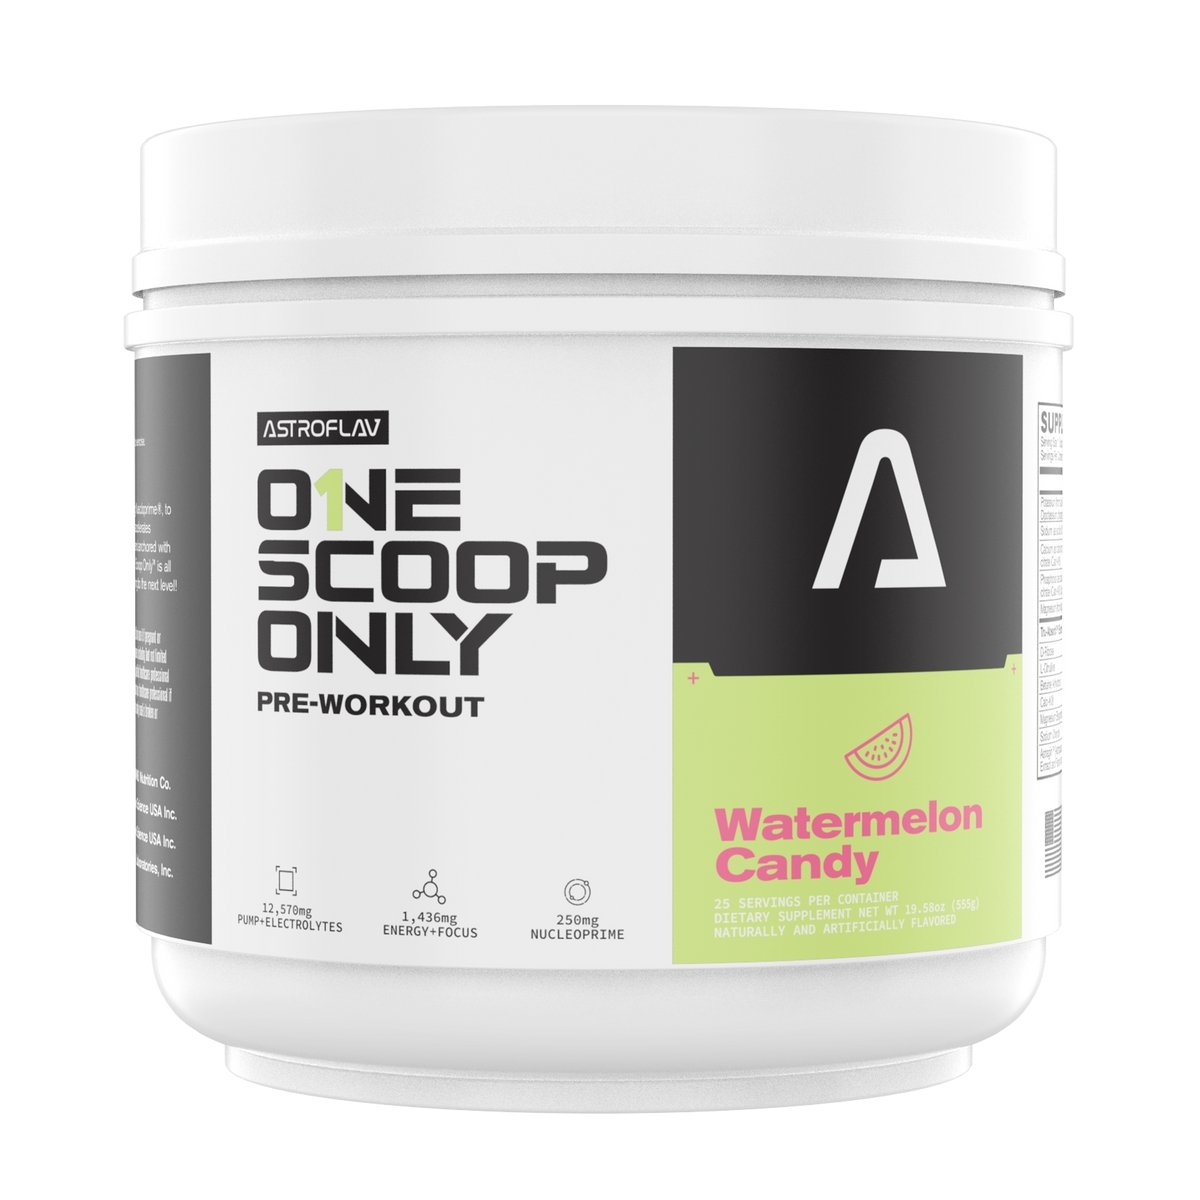 One scoop only - Pre workout by Astroflav - TRL NUTRITIONAstroflav